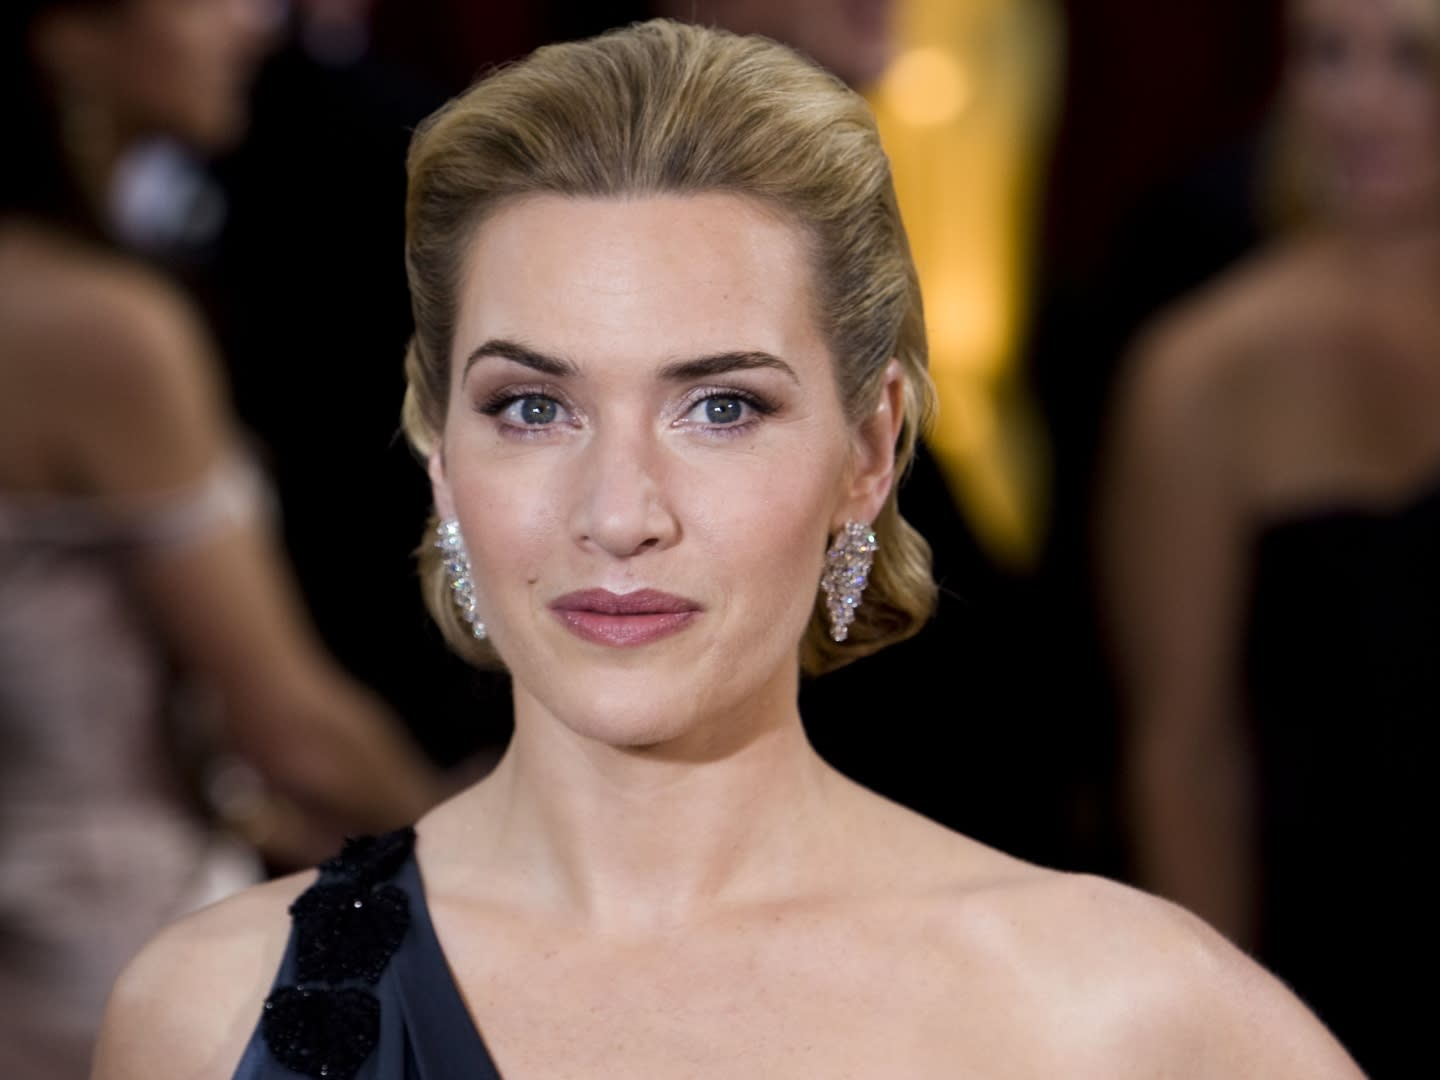 Kate Winslet reveals that life after ‘Titanic’ was not pleasant, thanks to the British press